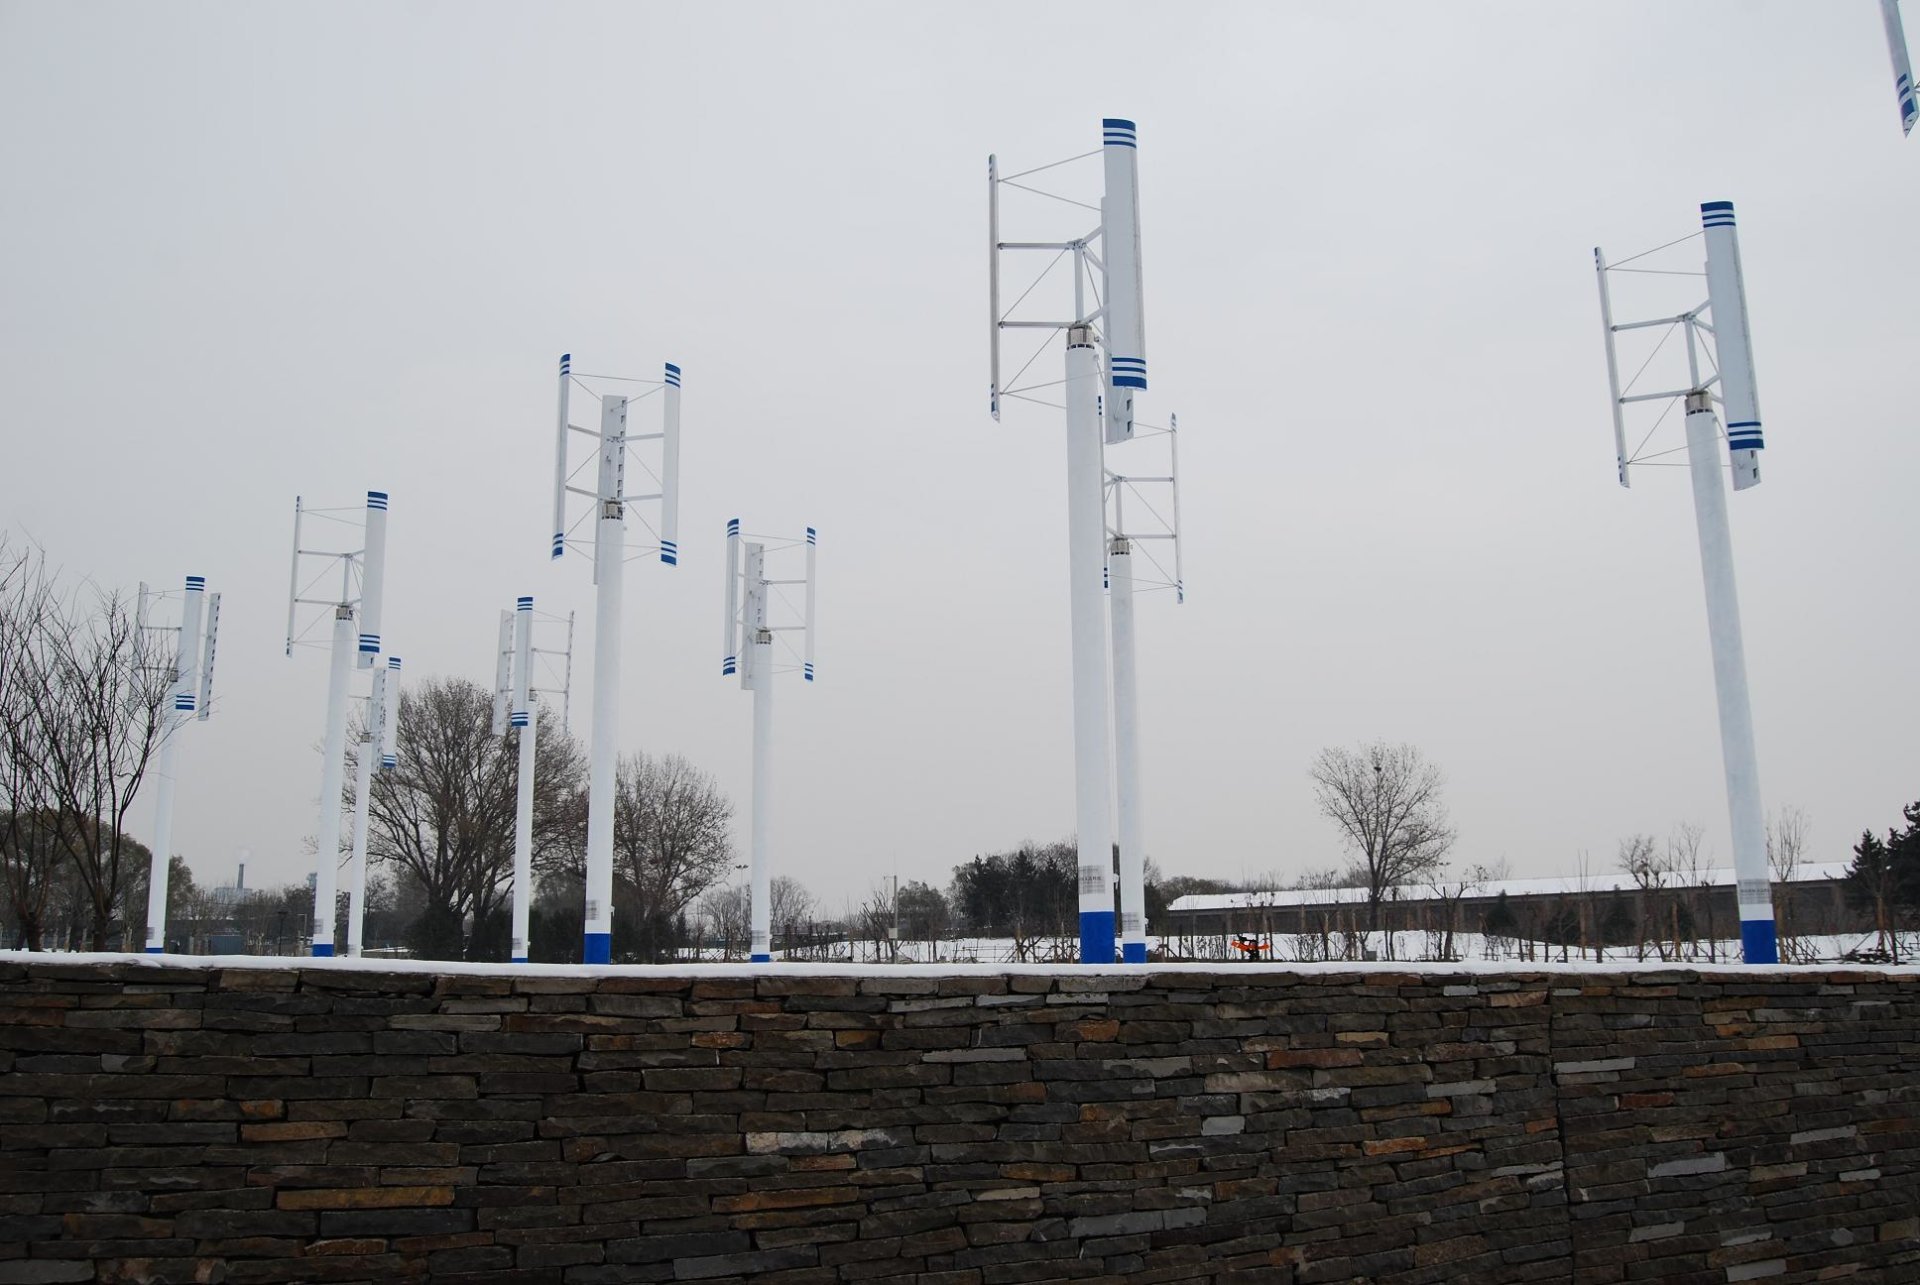 50kw vertical axis wind turbine installed in World Horticultural Exposition